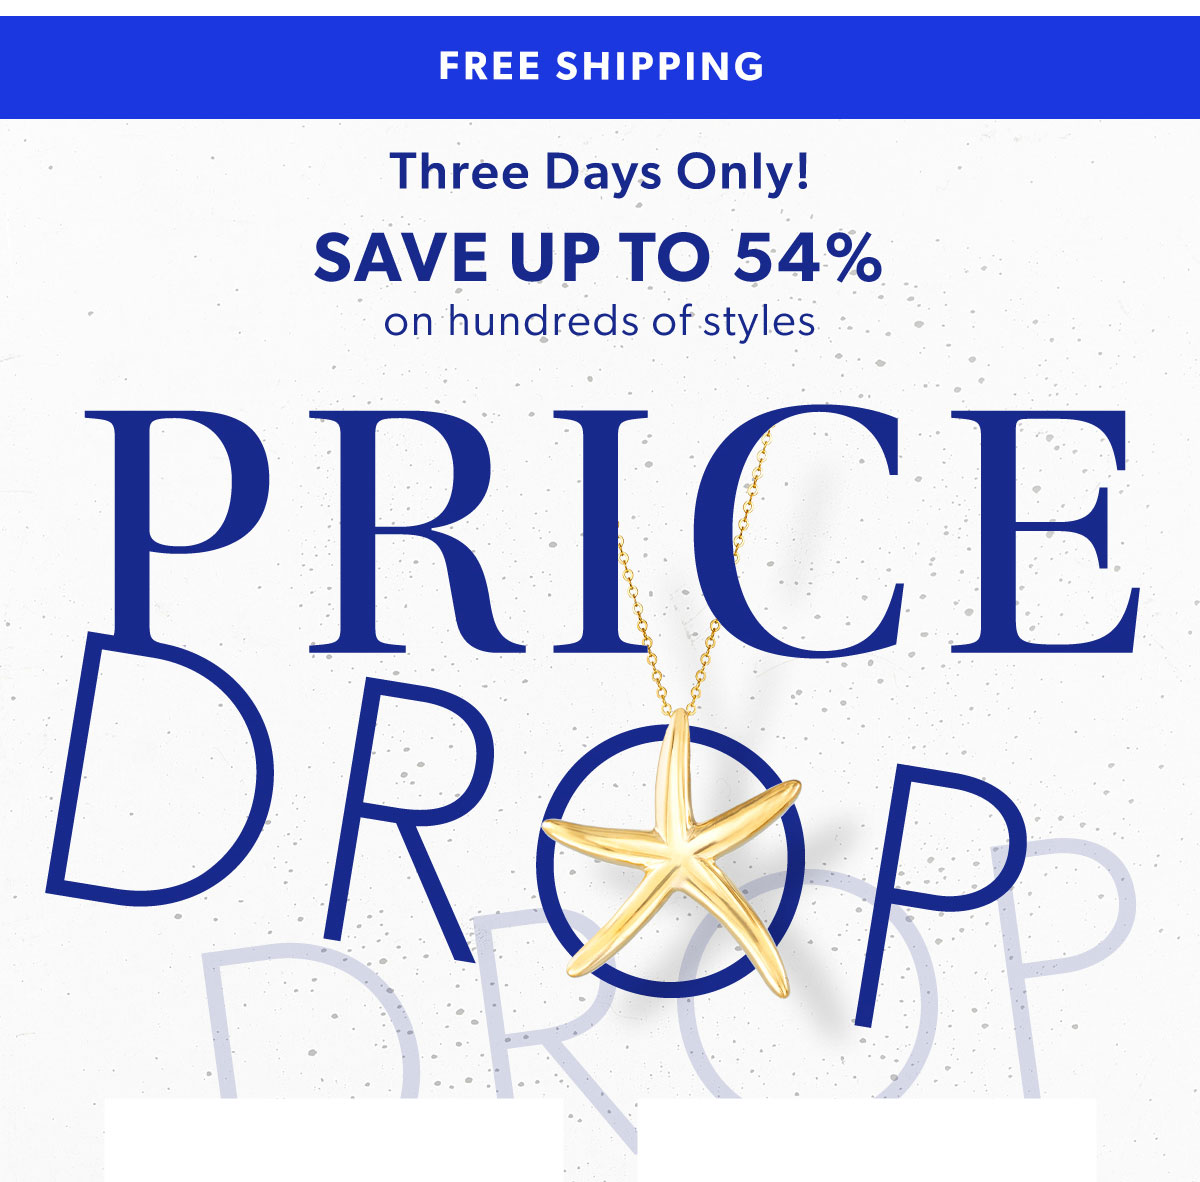 Price Drop Save Up To 54%